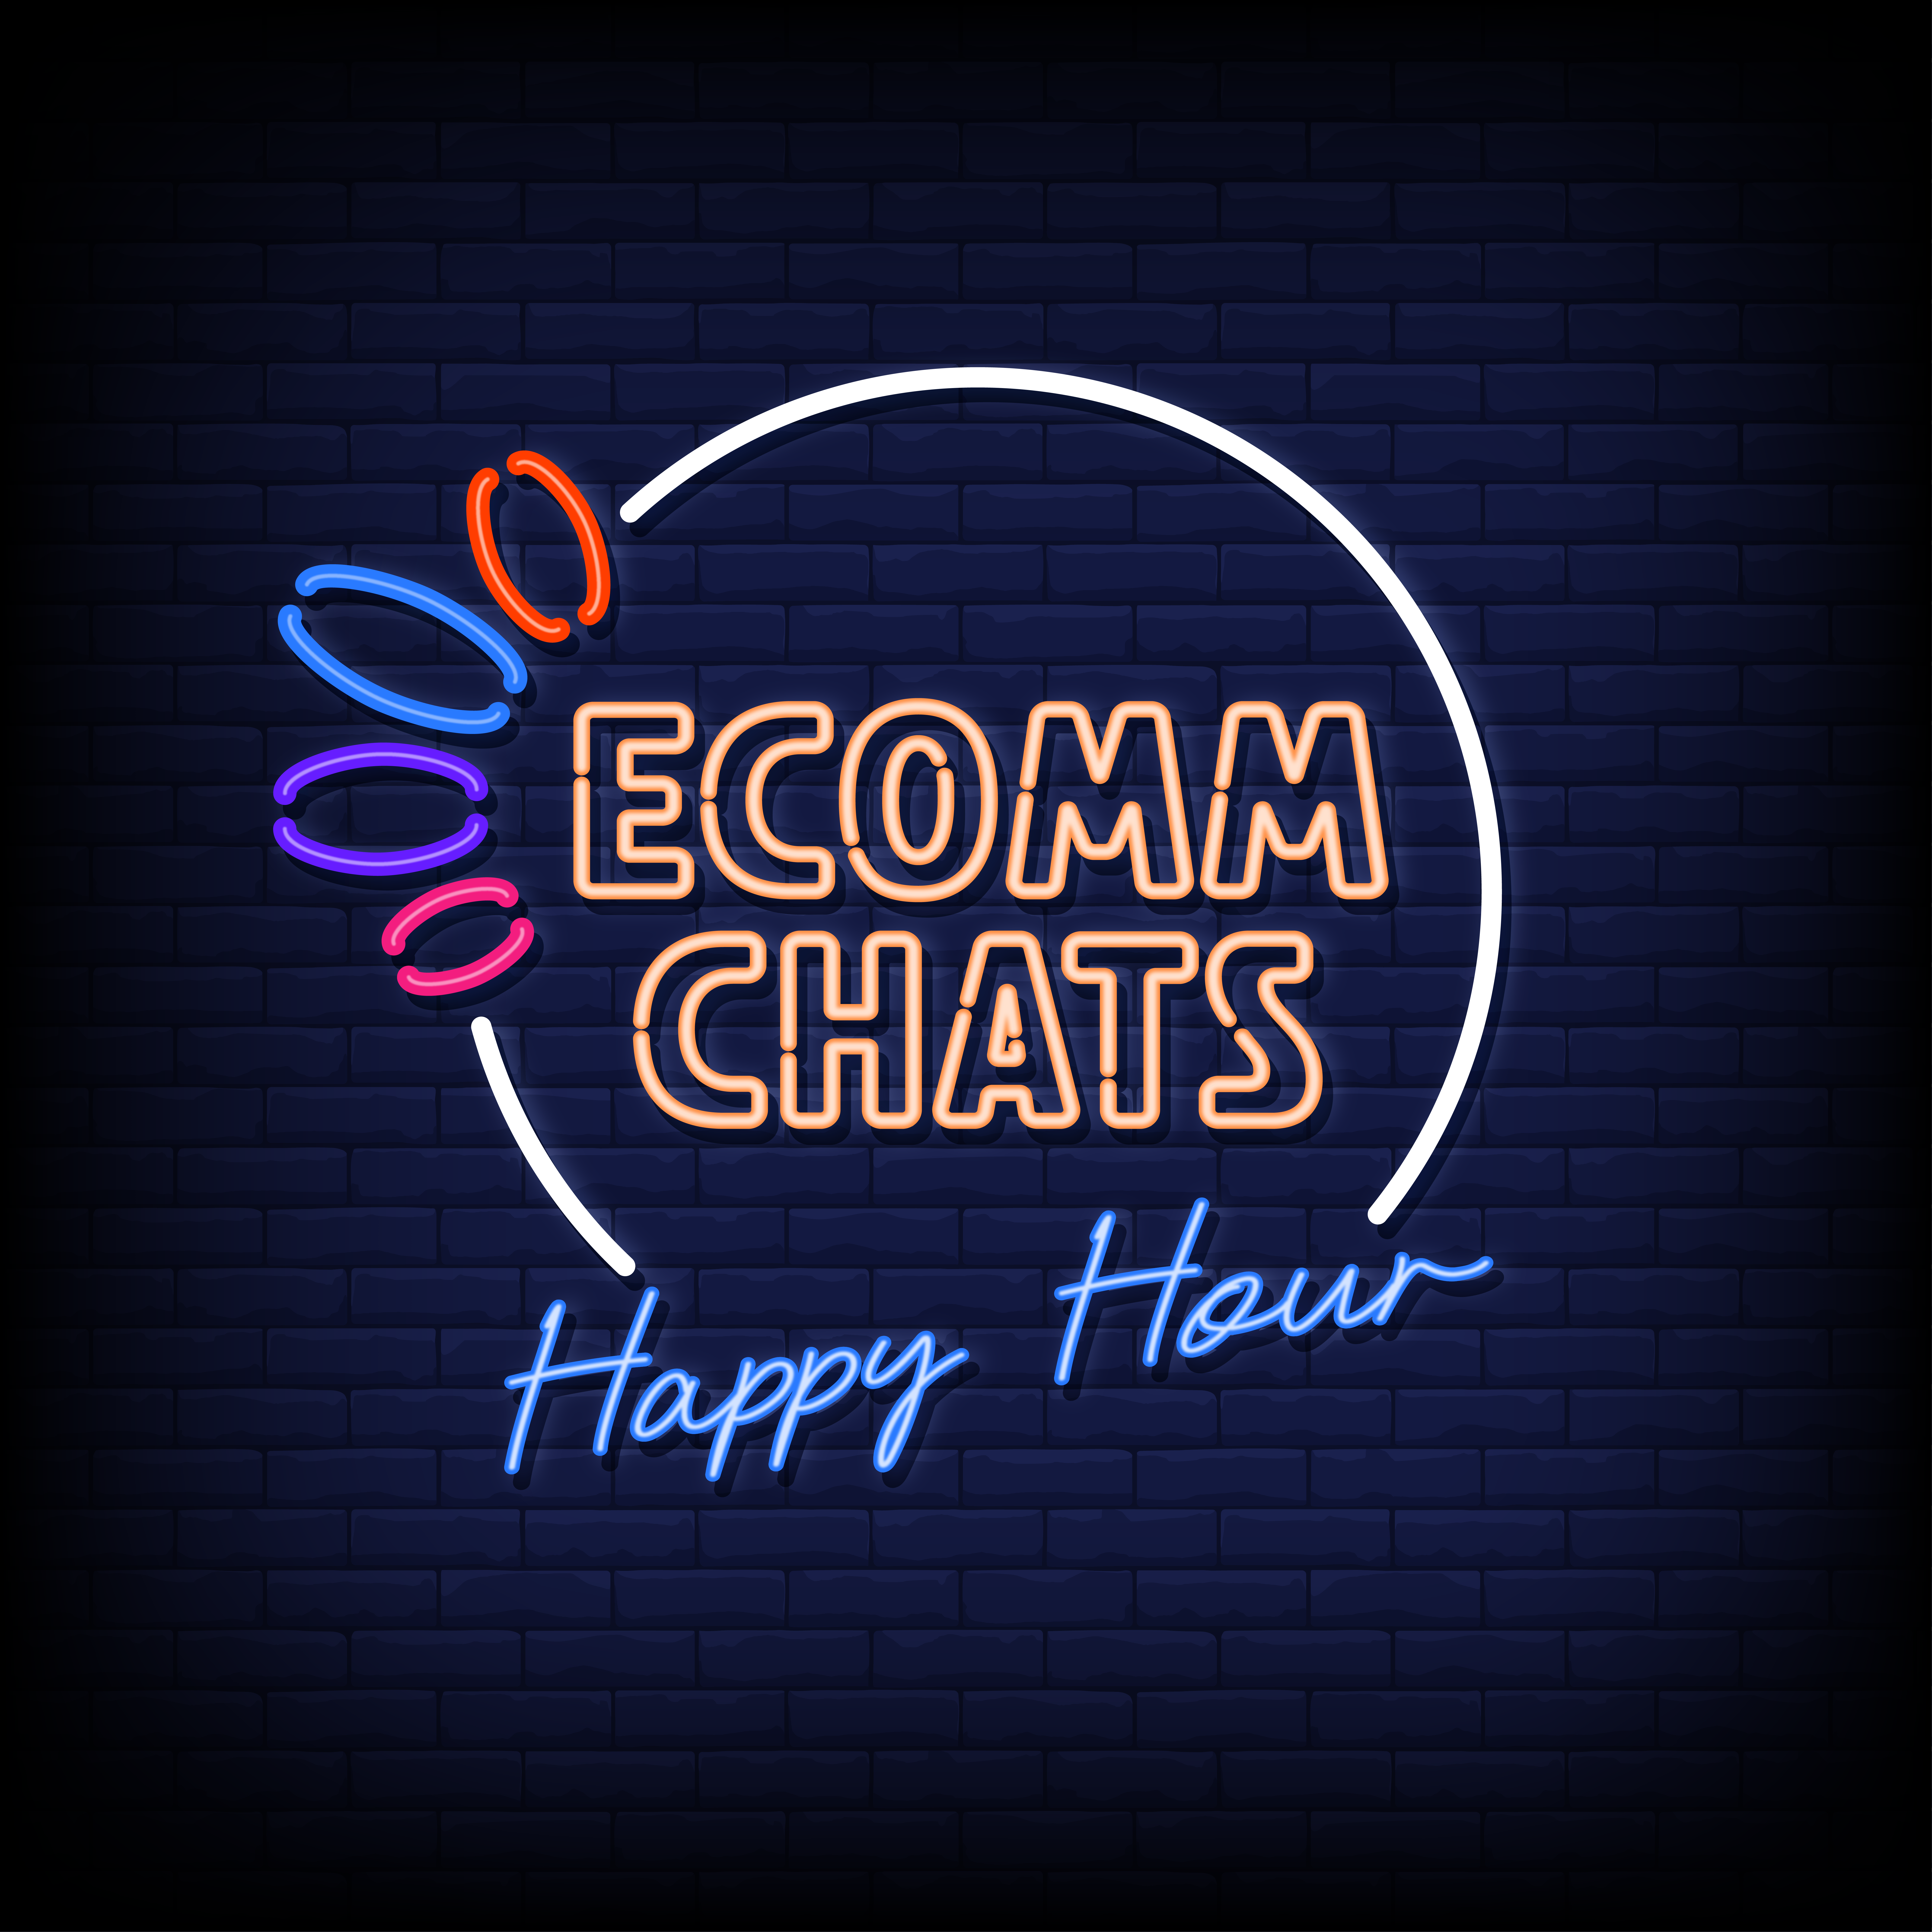 Finch-happy-hour_eComm-chats_neon_073123_v2